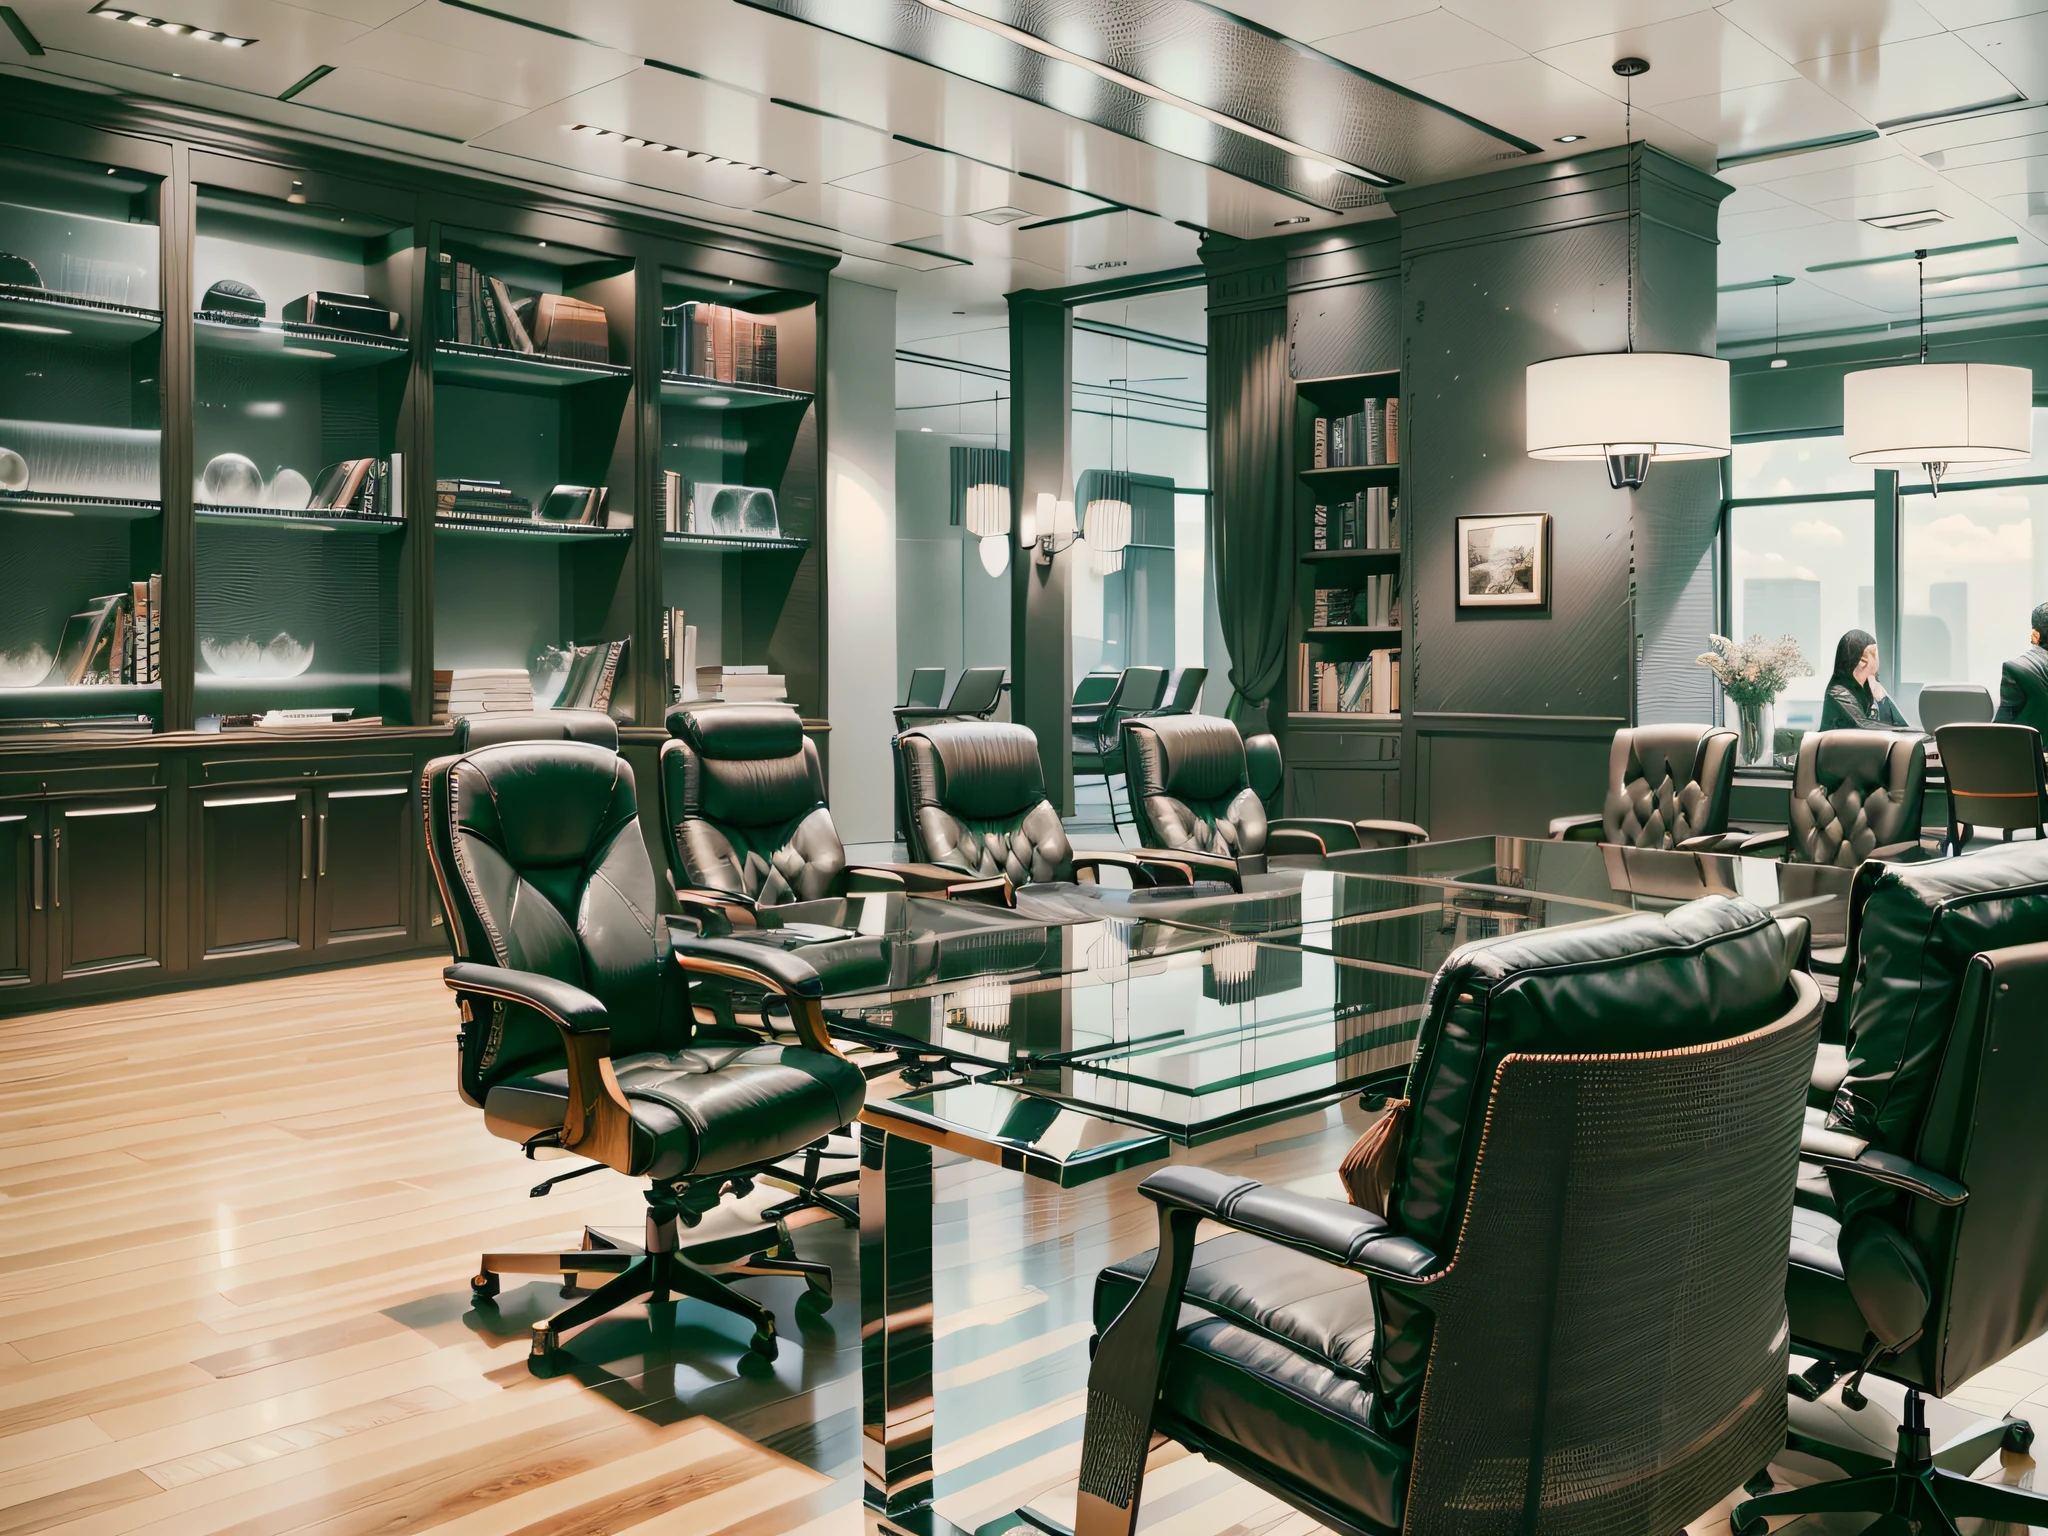 The law firm features contemporary design furniture, including armchairs upholstered in black and gray leather, tempered glass coffee tables with chrome bases, a solid wood meeting table with black leather chairs, and a built-in bookcase with brown leather bound legal books.